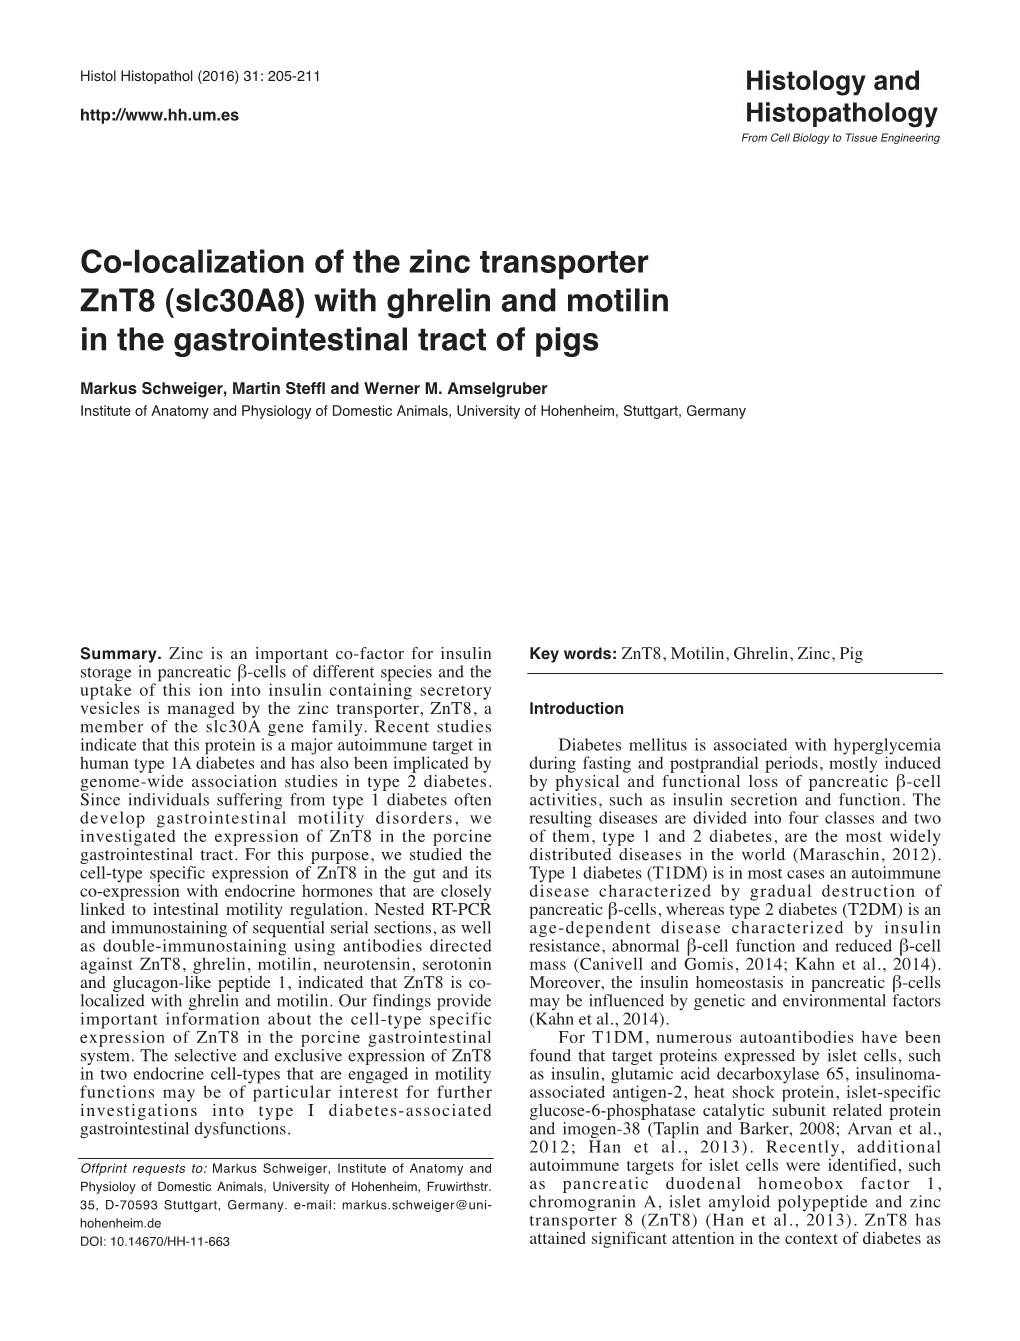 With Ghrelin and Motilin in the Gastrointestinal Tract of Pigs Markus Schweiger, Martin Steffl and Werner M